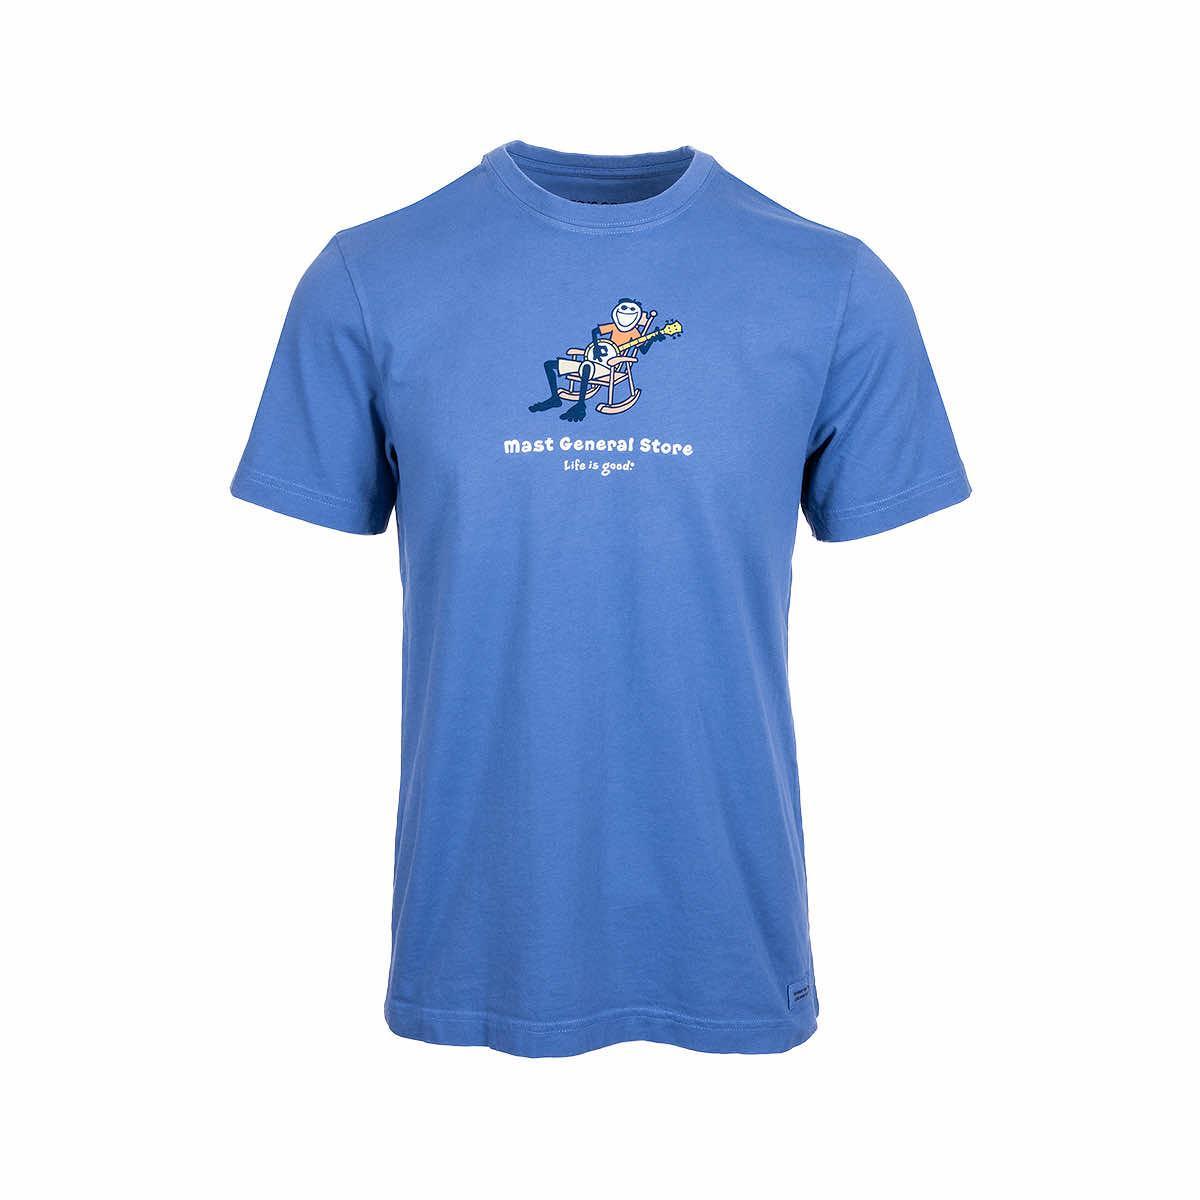  MR. Blue Sky for blue lovers T-Shirt : Clothing, Shoes